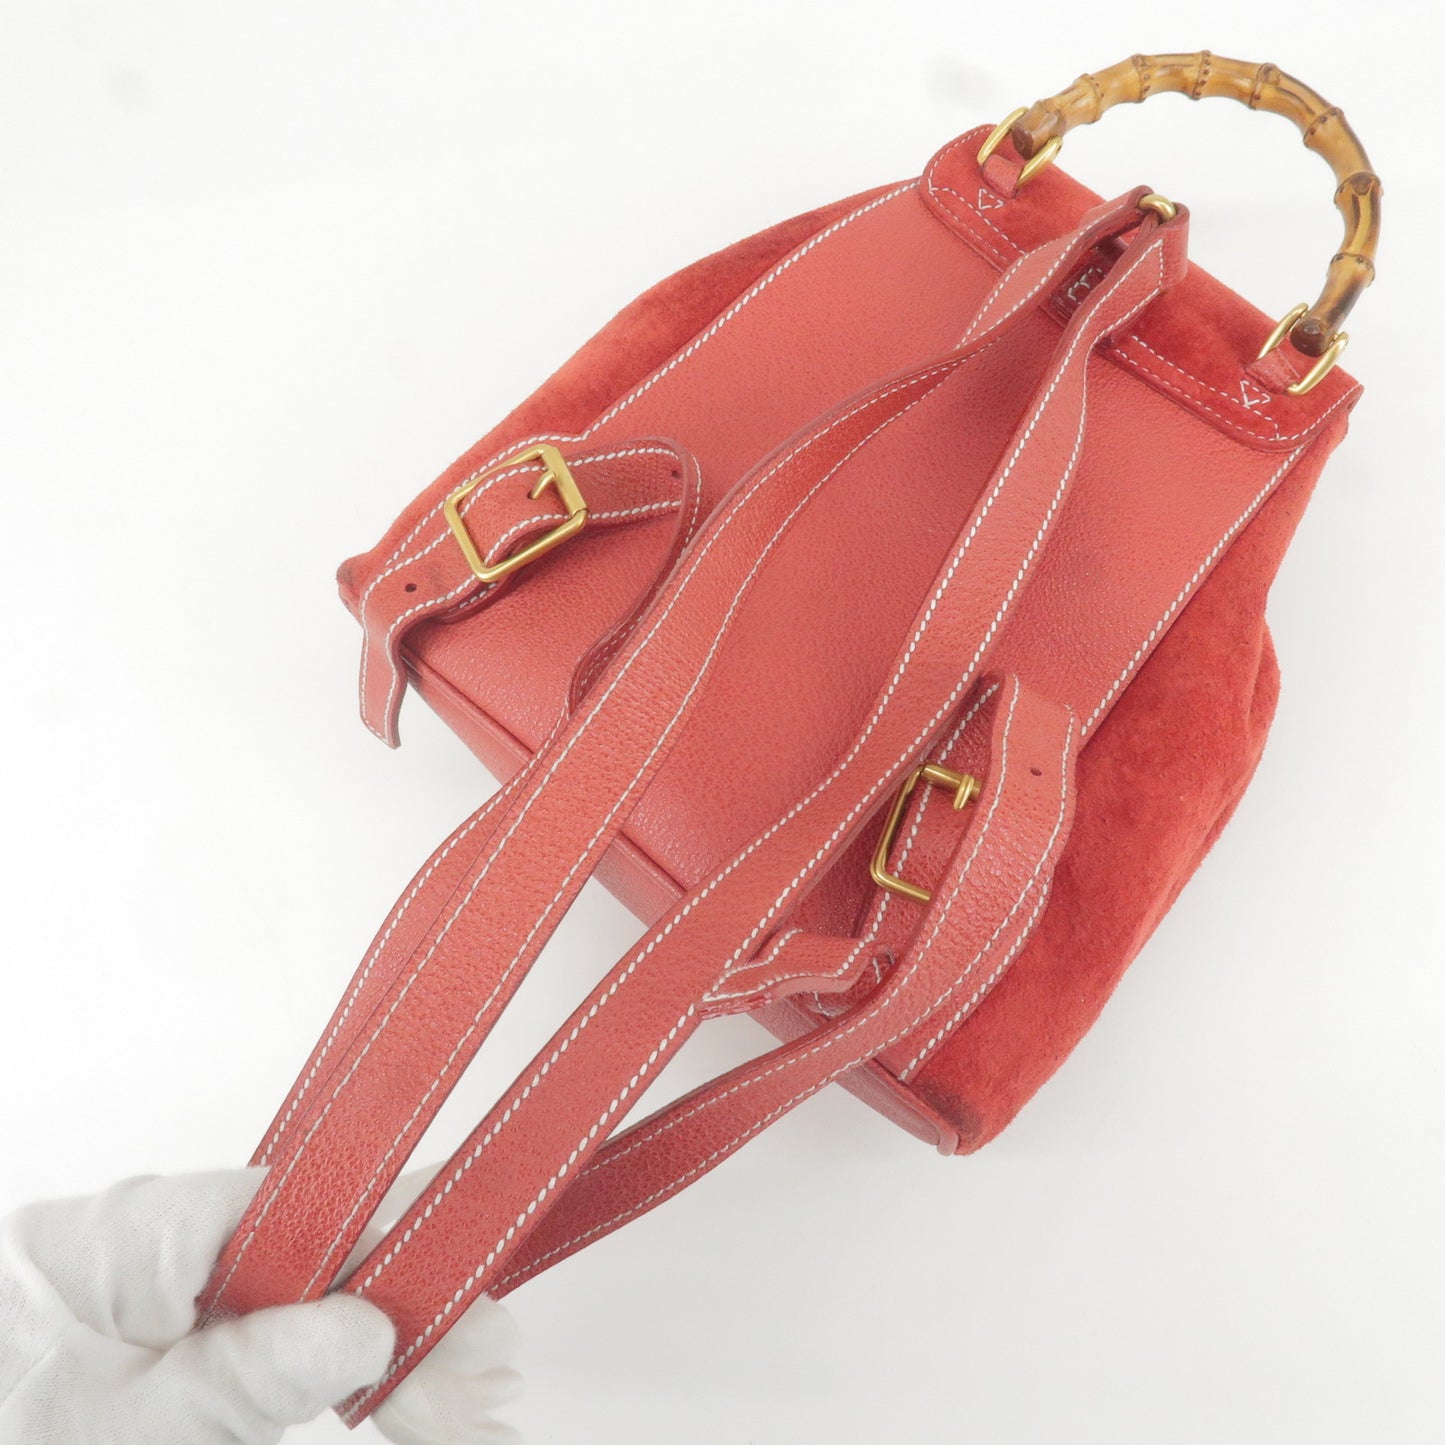 GUCCI Bamboo Suede Leather Ruck Sack Back Pack Red 003.1705.0030